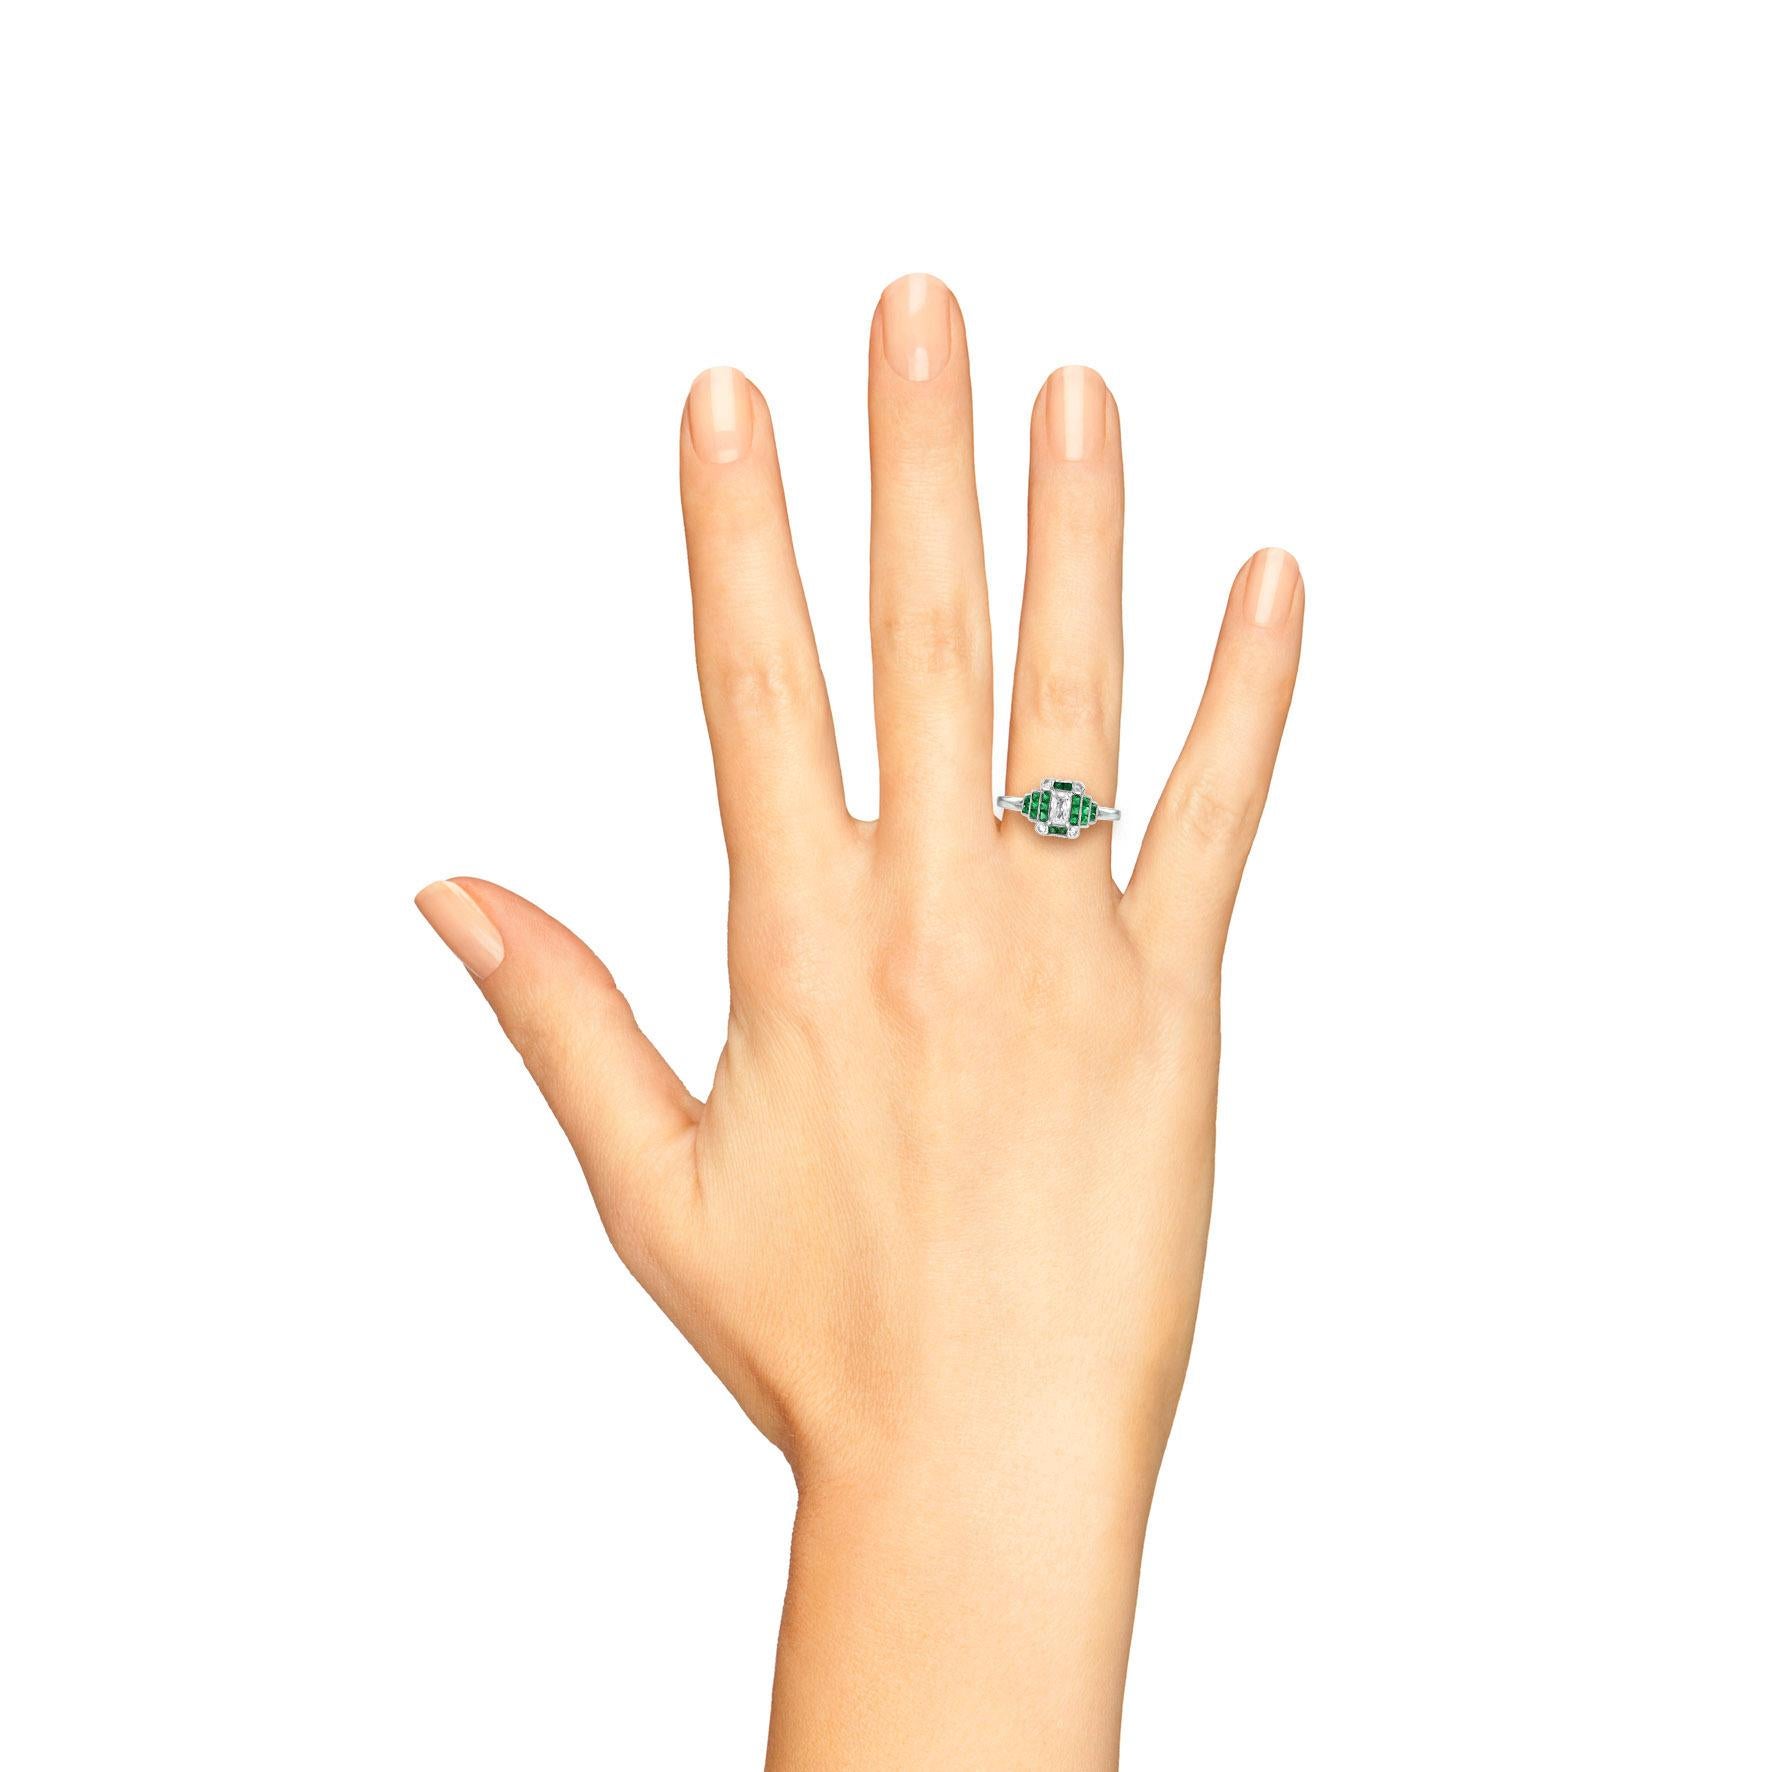 This splendid, Art Deco inspired ring scintillates at its center with a bright white 0.22 carat radiant cut diamond, held aloft by steps French cut emeralds, approx. total weight of 1.34 carat and four round diamonds at its corners. Hand fabricated